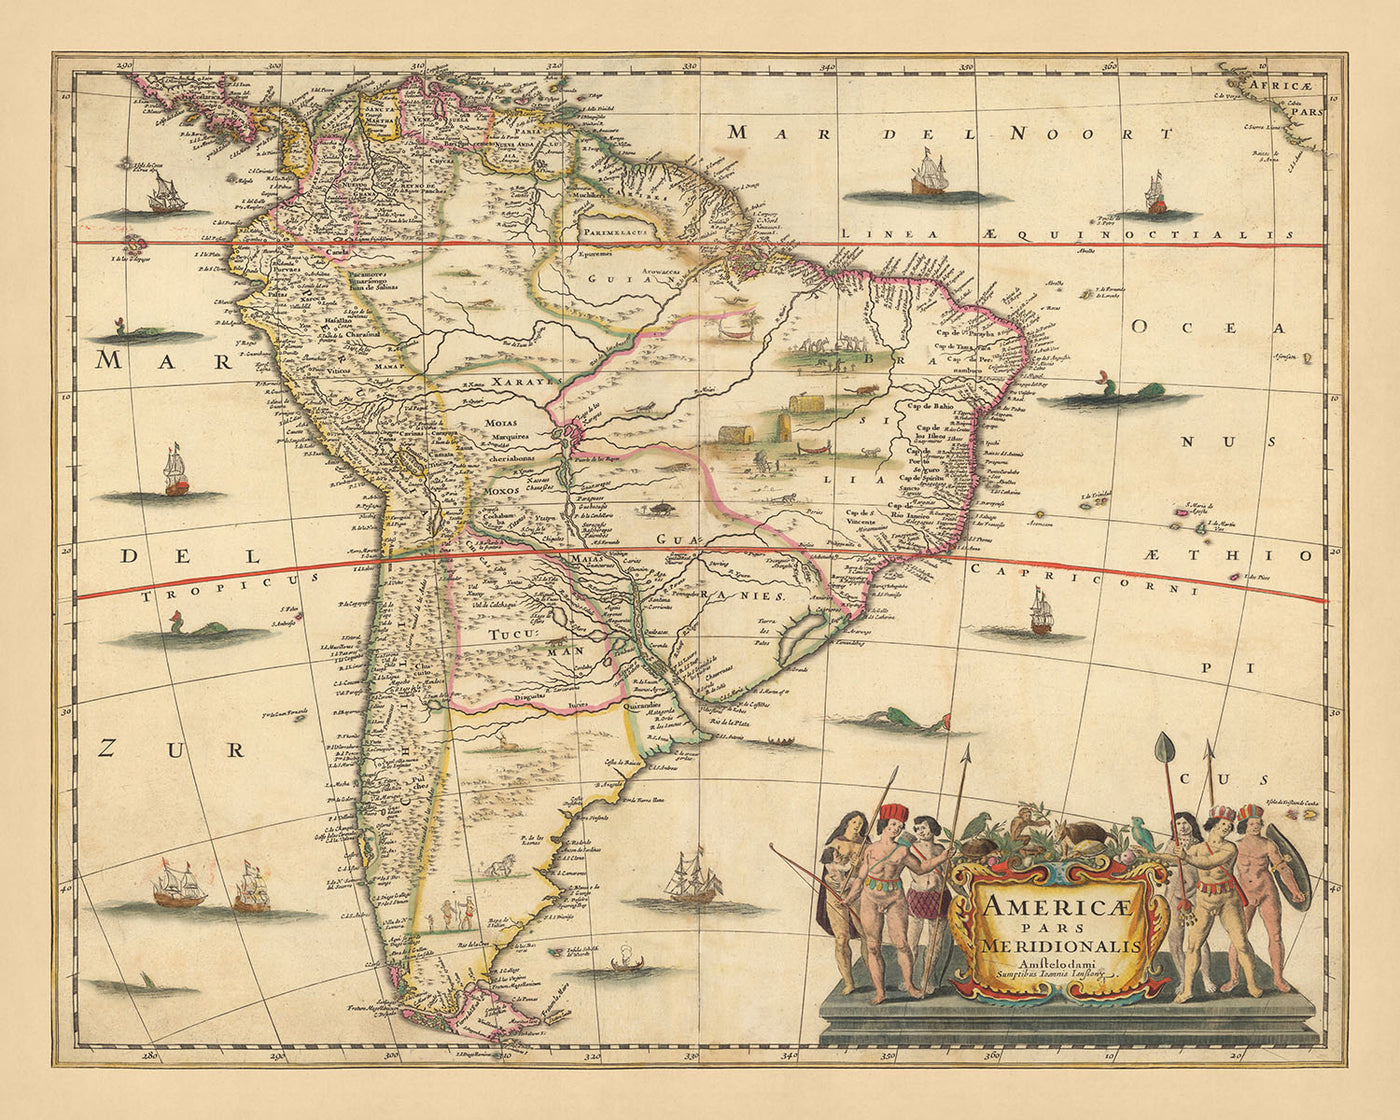 Old Map of South America by Visscher, 1690: Brasilia, Buenos Aires, Falkland Islands, Galapagos Islands, Amazon Rainforest